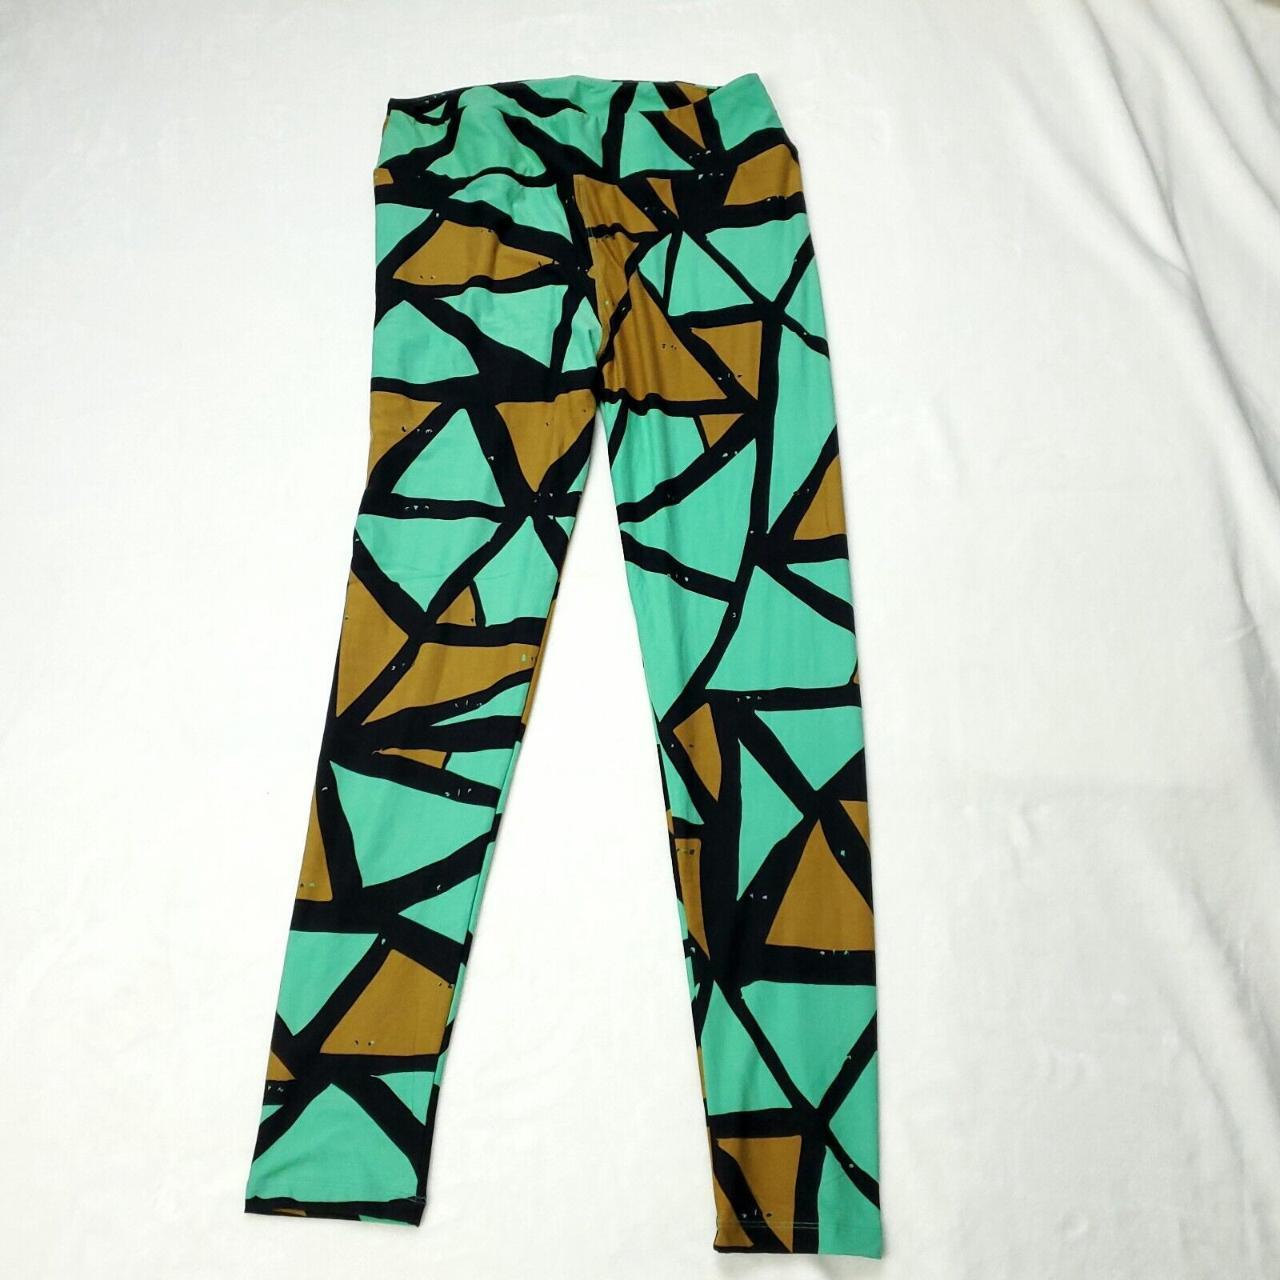 Tall and Curvy LuLaRoe leggings unboxing! 